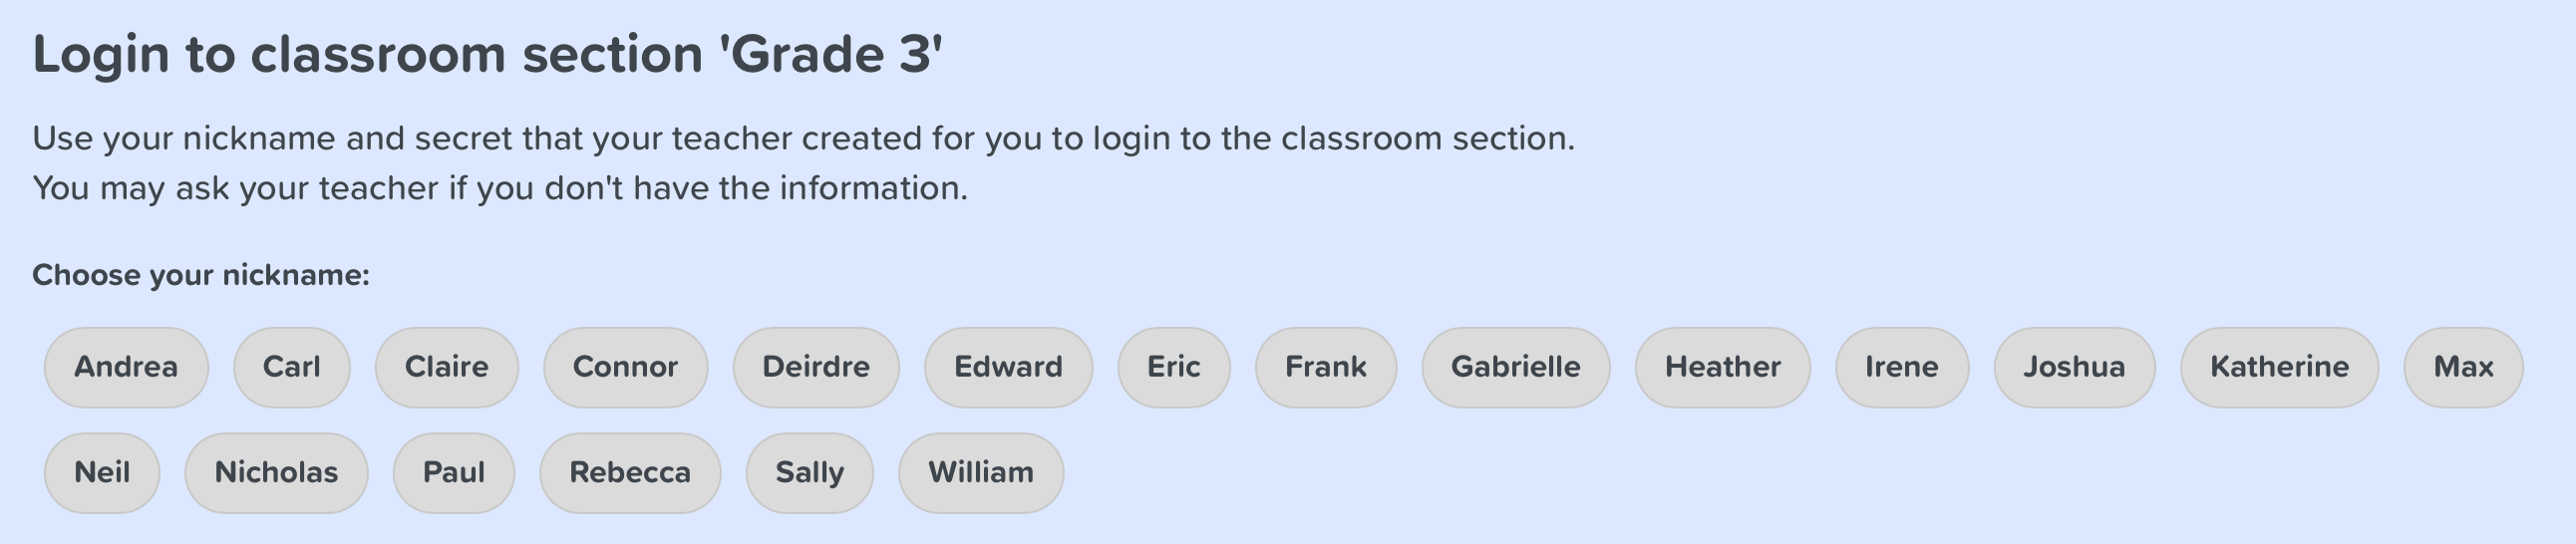 Student login to classroom section